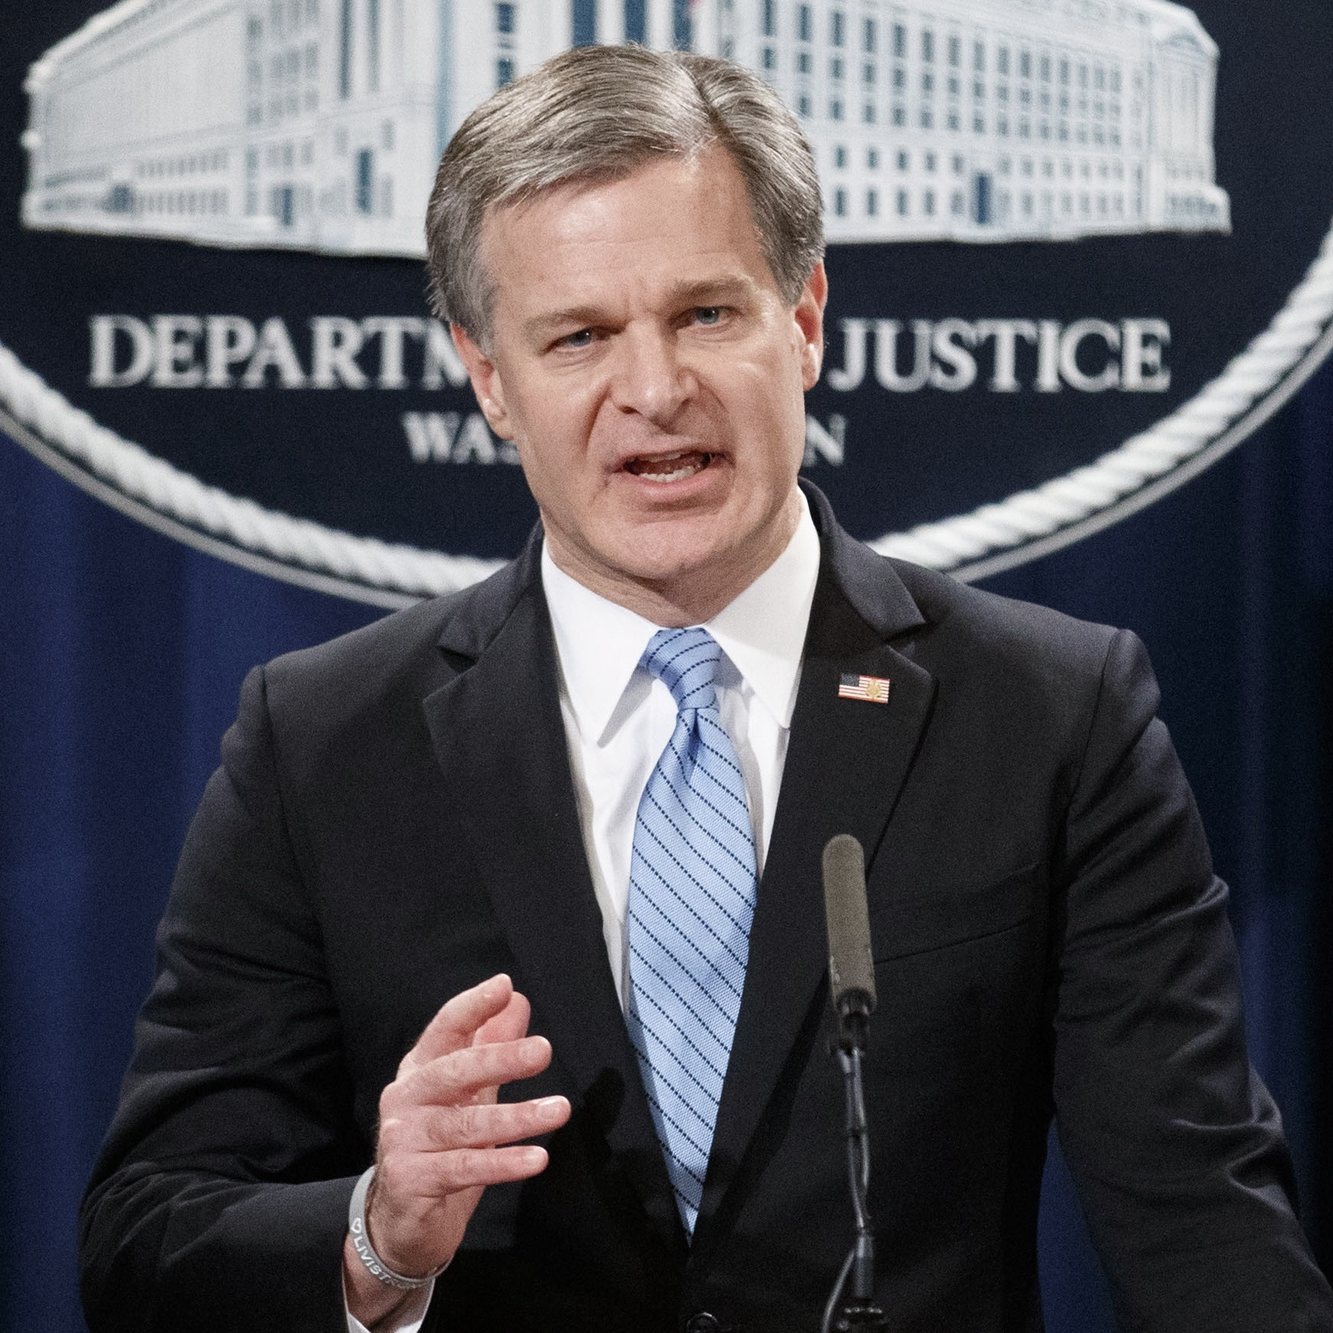 epa07122159 FBI Director Christopher Wray joins US Attorney General Jeff Sessions and delivers remarks on the apprehension and arrest of mail bomb suspect Cesar Sayoc jr. during a press conference at the Department of Justice in Washington, DC, USA, 26 October 2018. Attorney General Sessions was joined FBI Director Chris Wray, New York Police Department Commissioner James P. O&#039;Neill, U.S. Attorney Geoffrey Berman for the Southern District of New York, ATF Deputy Director Thomas E. Brandon, FBI New York Field Office Assistant Director in Charge William F. Sweeney, Jr. and U.S. Postal Inspection Service Deputy Chief Gary Barksdale.  EPA/SHAWN THEW